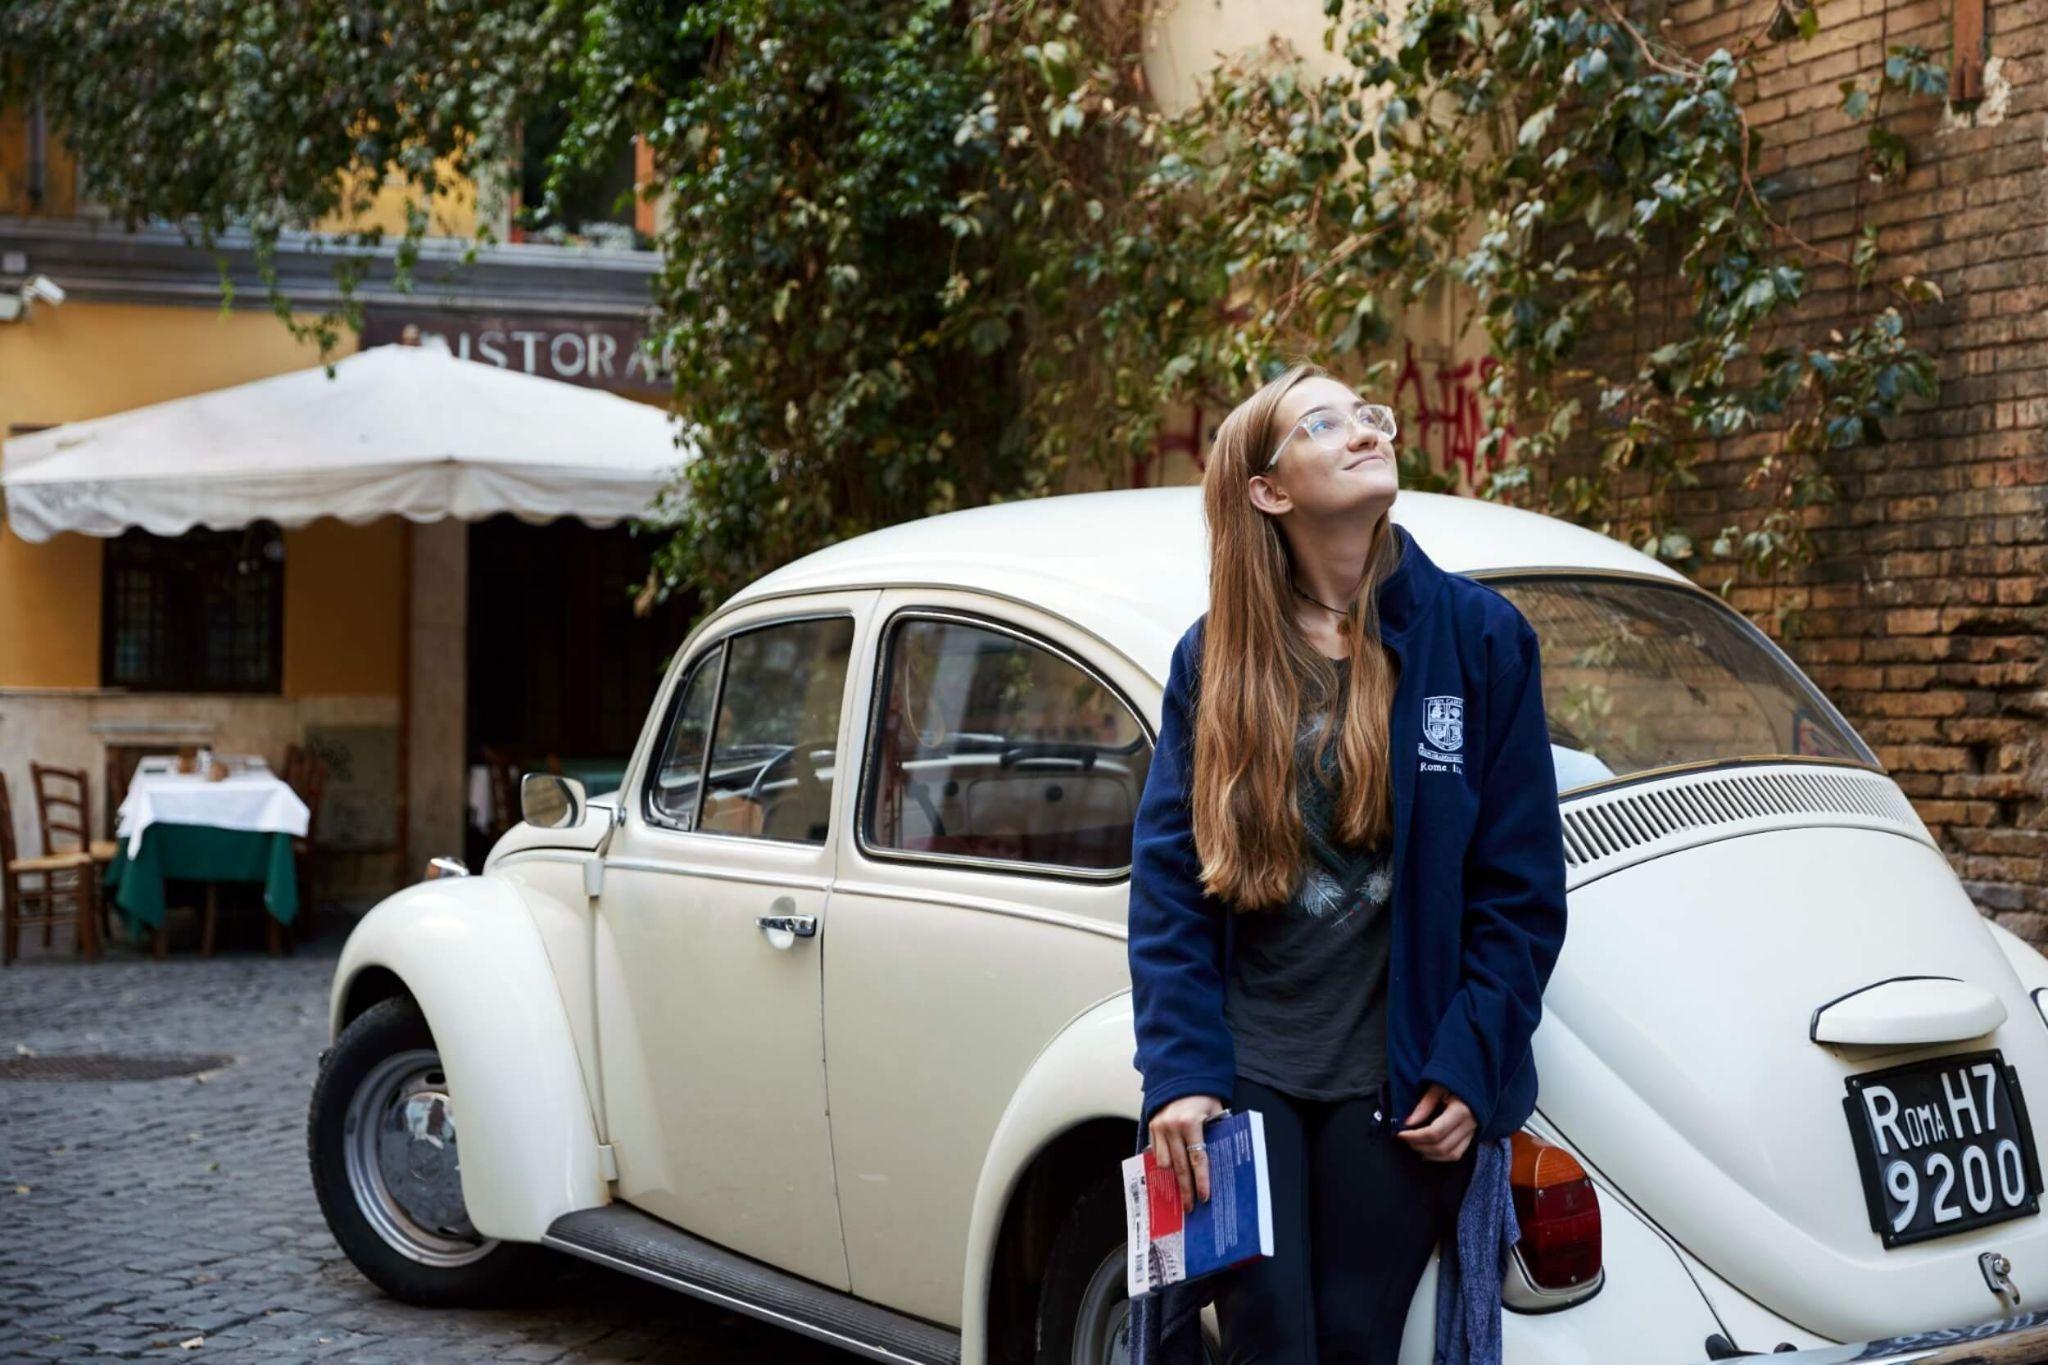 A student attending university in Rome posing in front of a vintage car